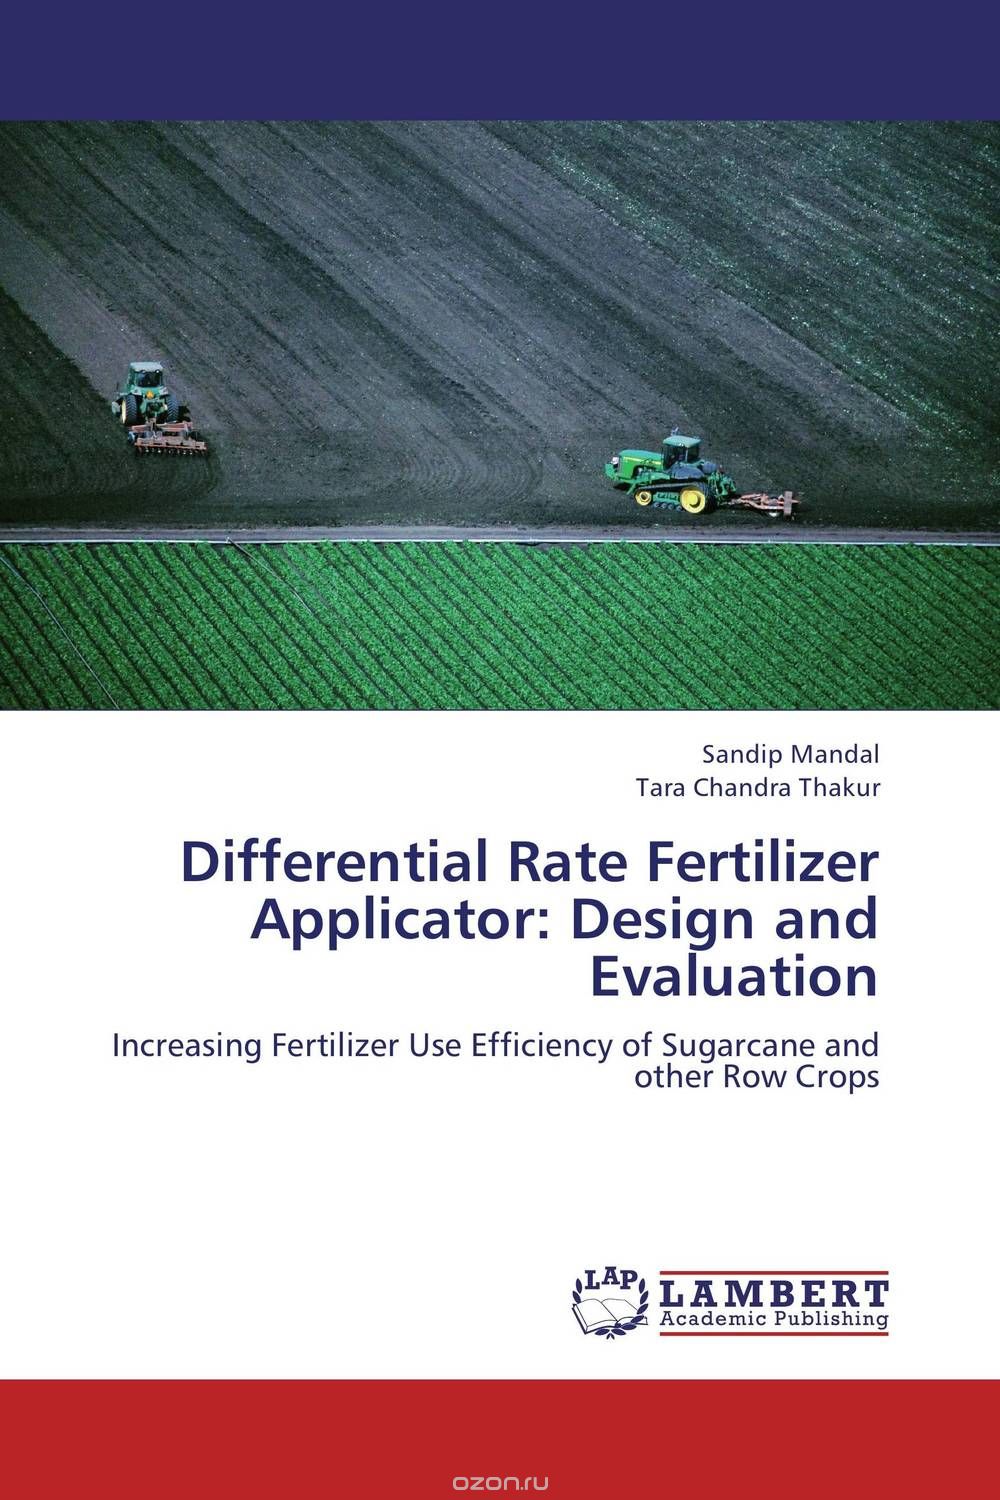 Differential Rate Fertilizer Applicator: Design and Evaluation